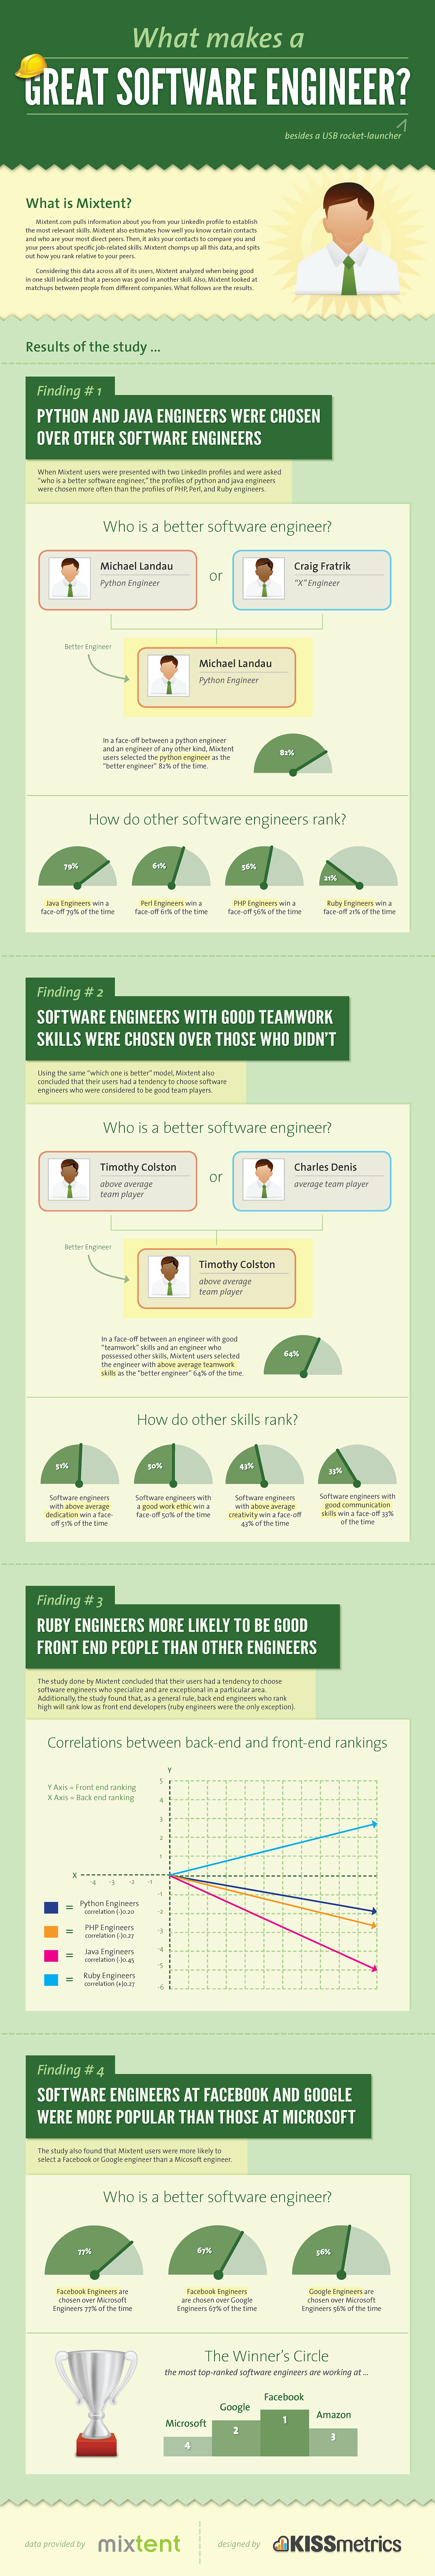 Great Software Engineers